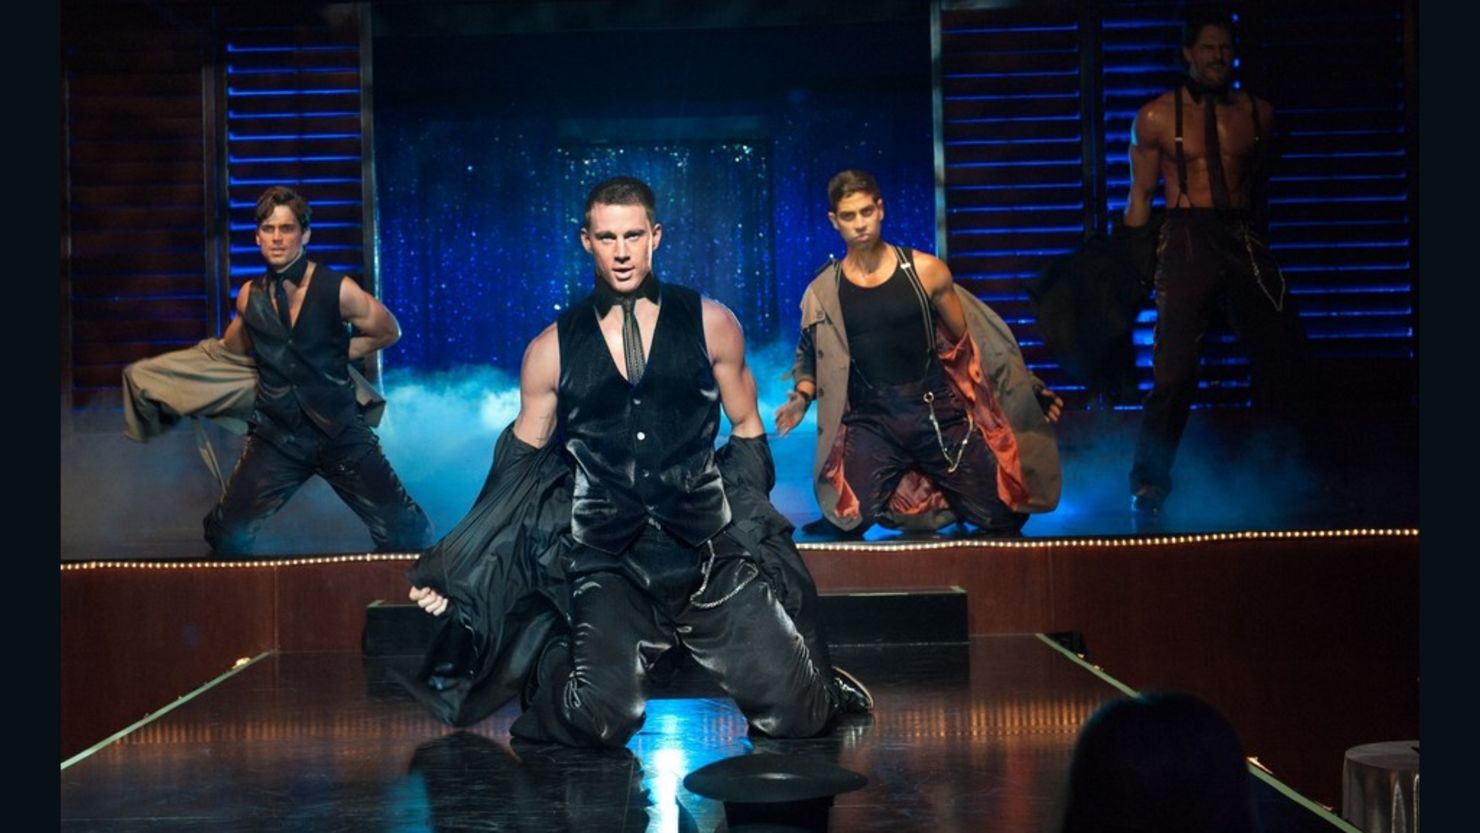 The "Magic Mike" sequel is set to hit theaters in July 2015.